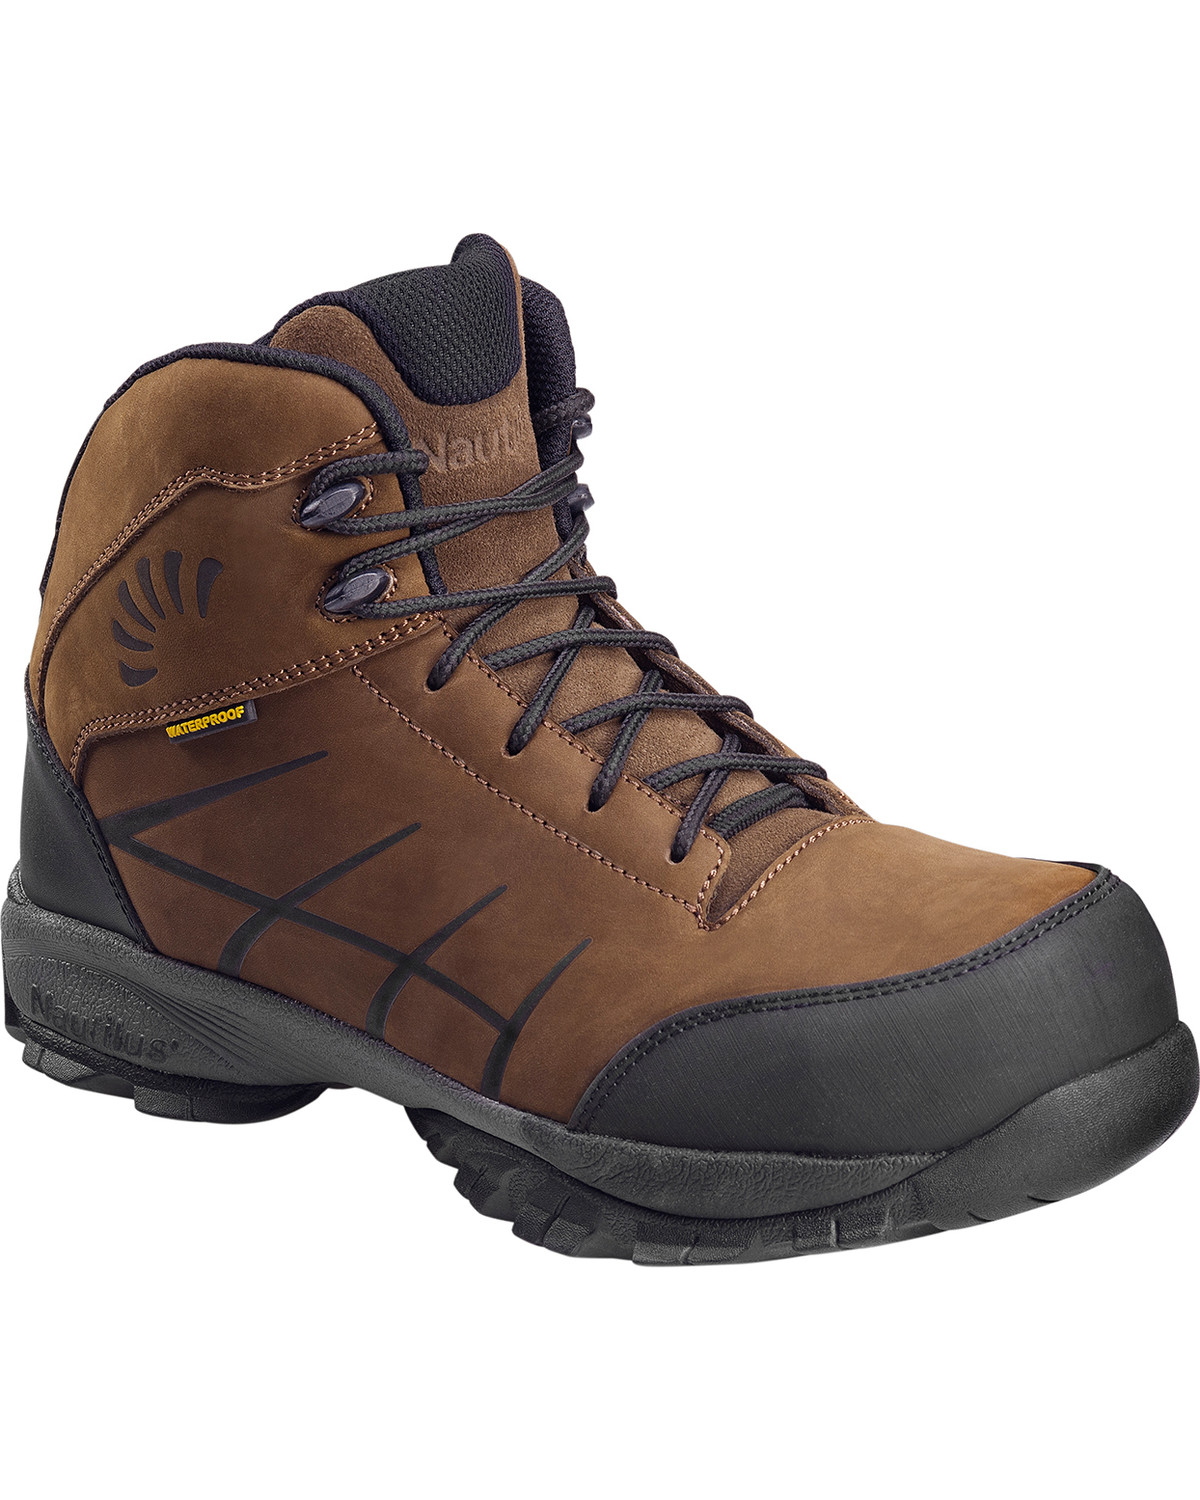 Men's Work Boots Safety Shoes Steel Toe ESD Lightweight Breathable Hike Sneakers 